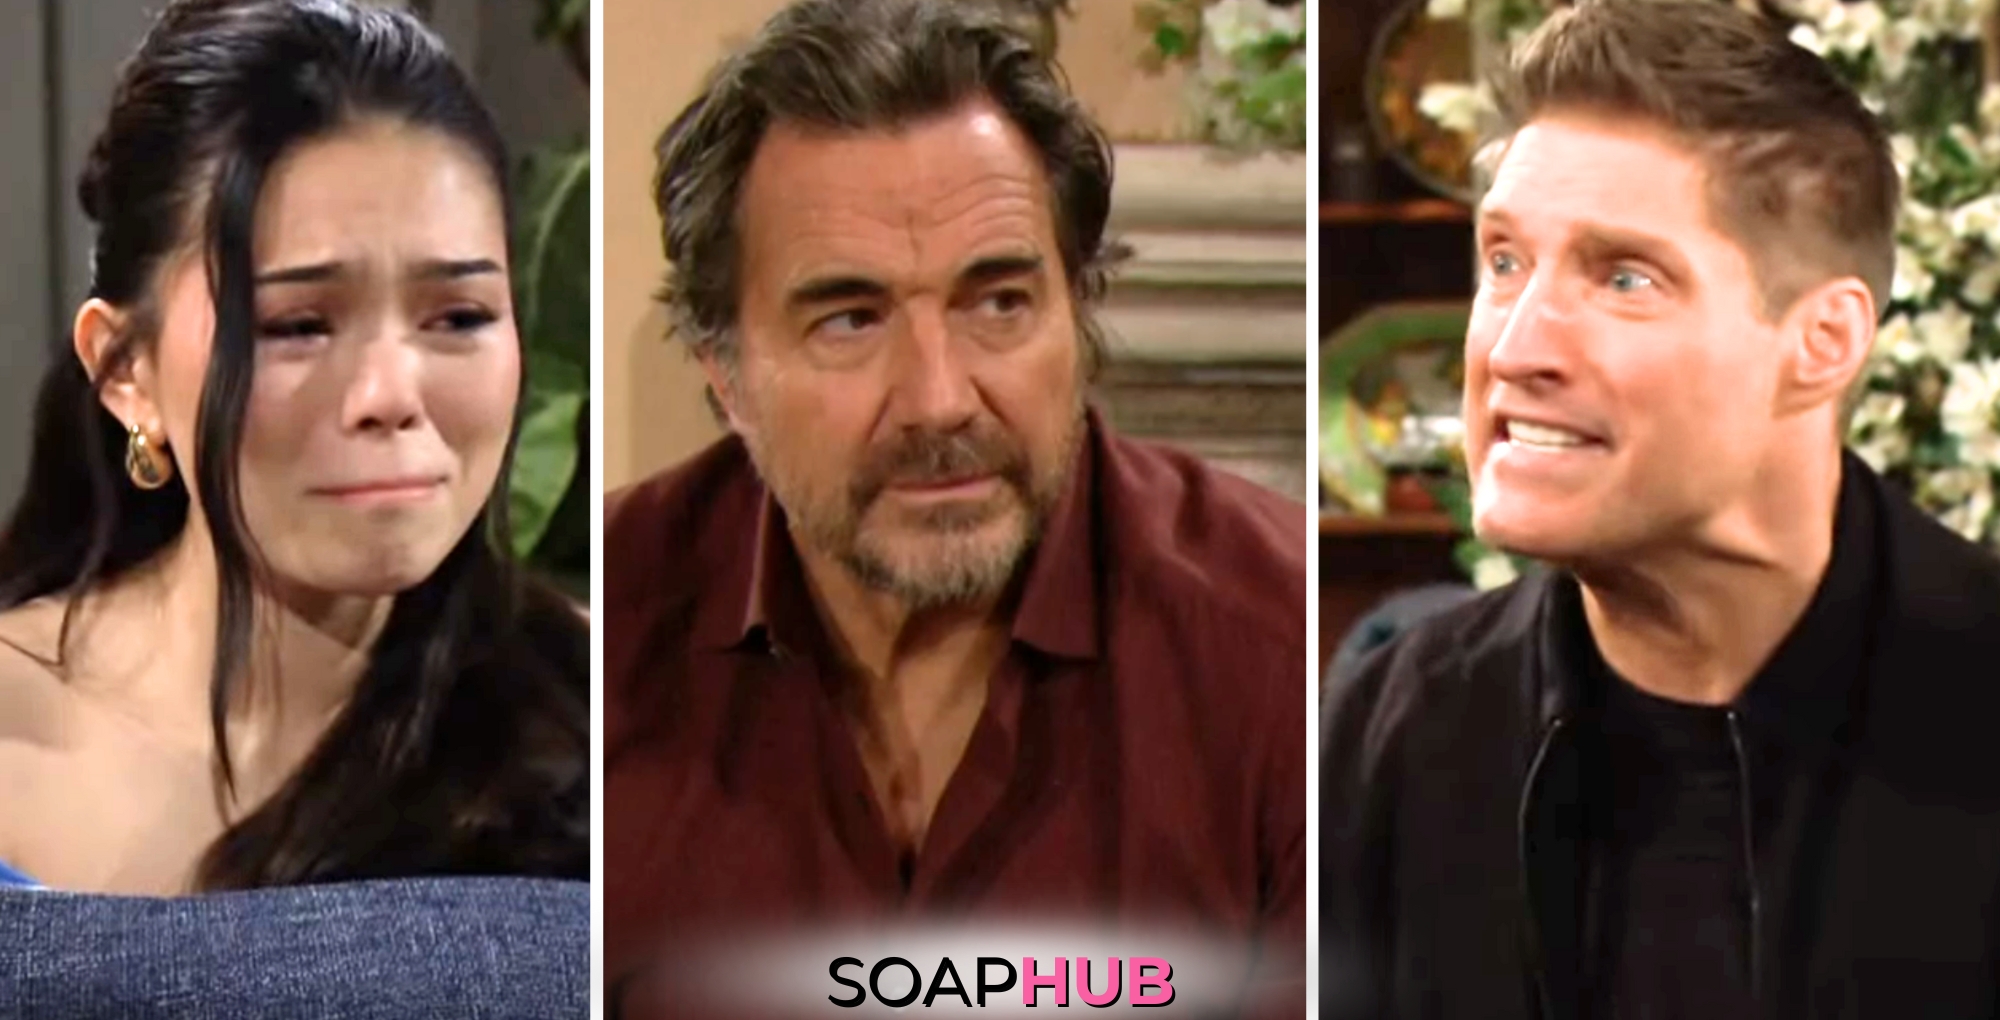 The Bold and the Beautiful spoilers for the week April 8 - 12 feature Luna, Ridge, and Deacon and the Soap Hub logo across the bottom.